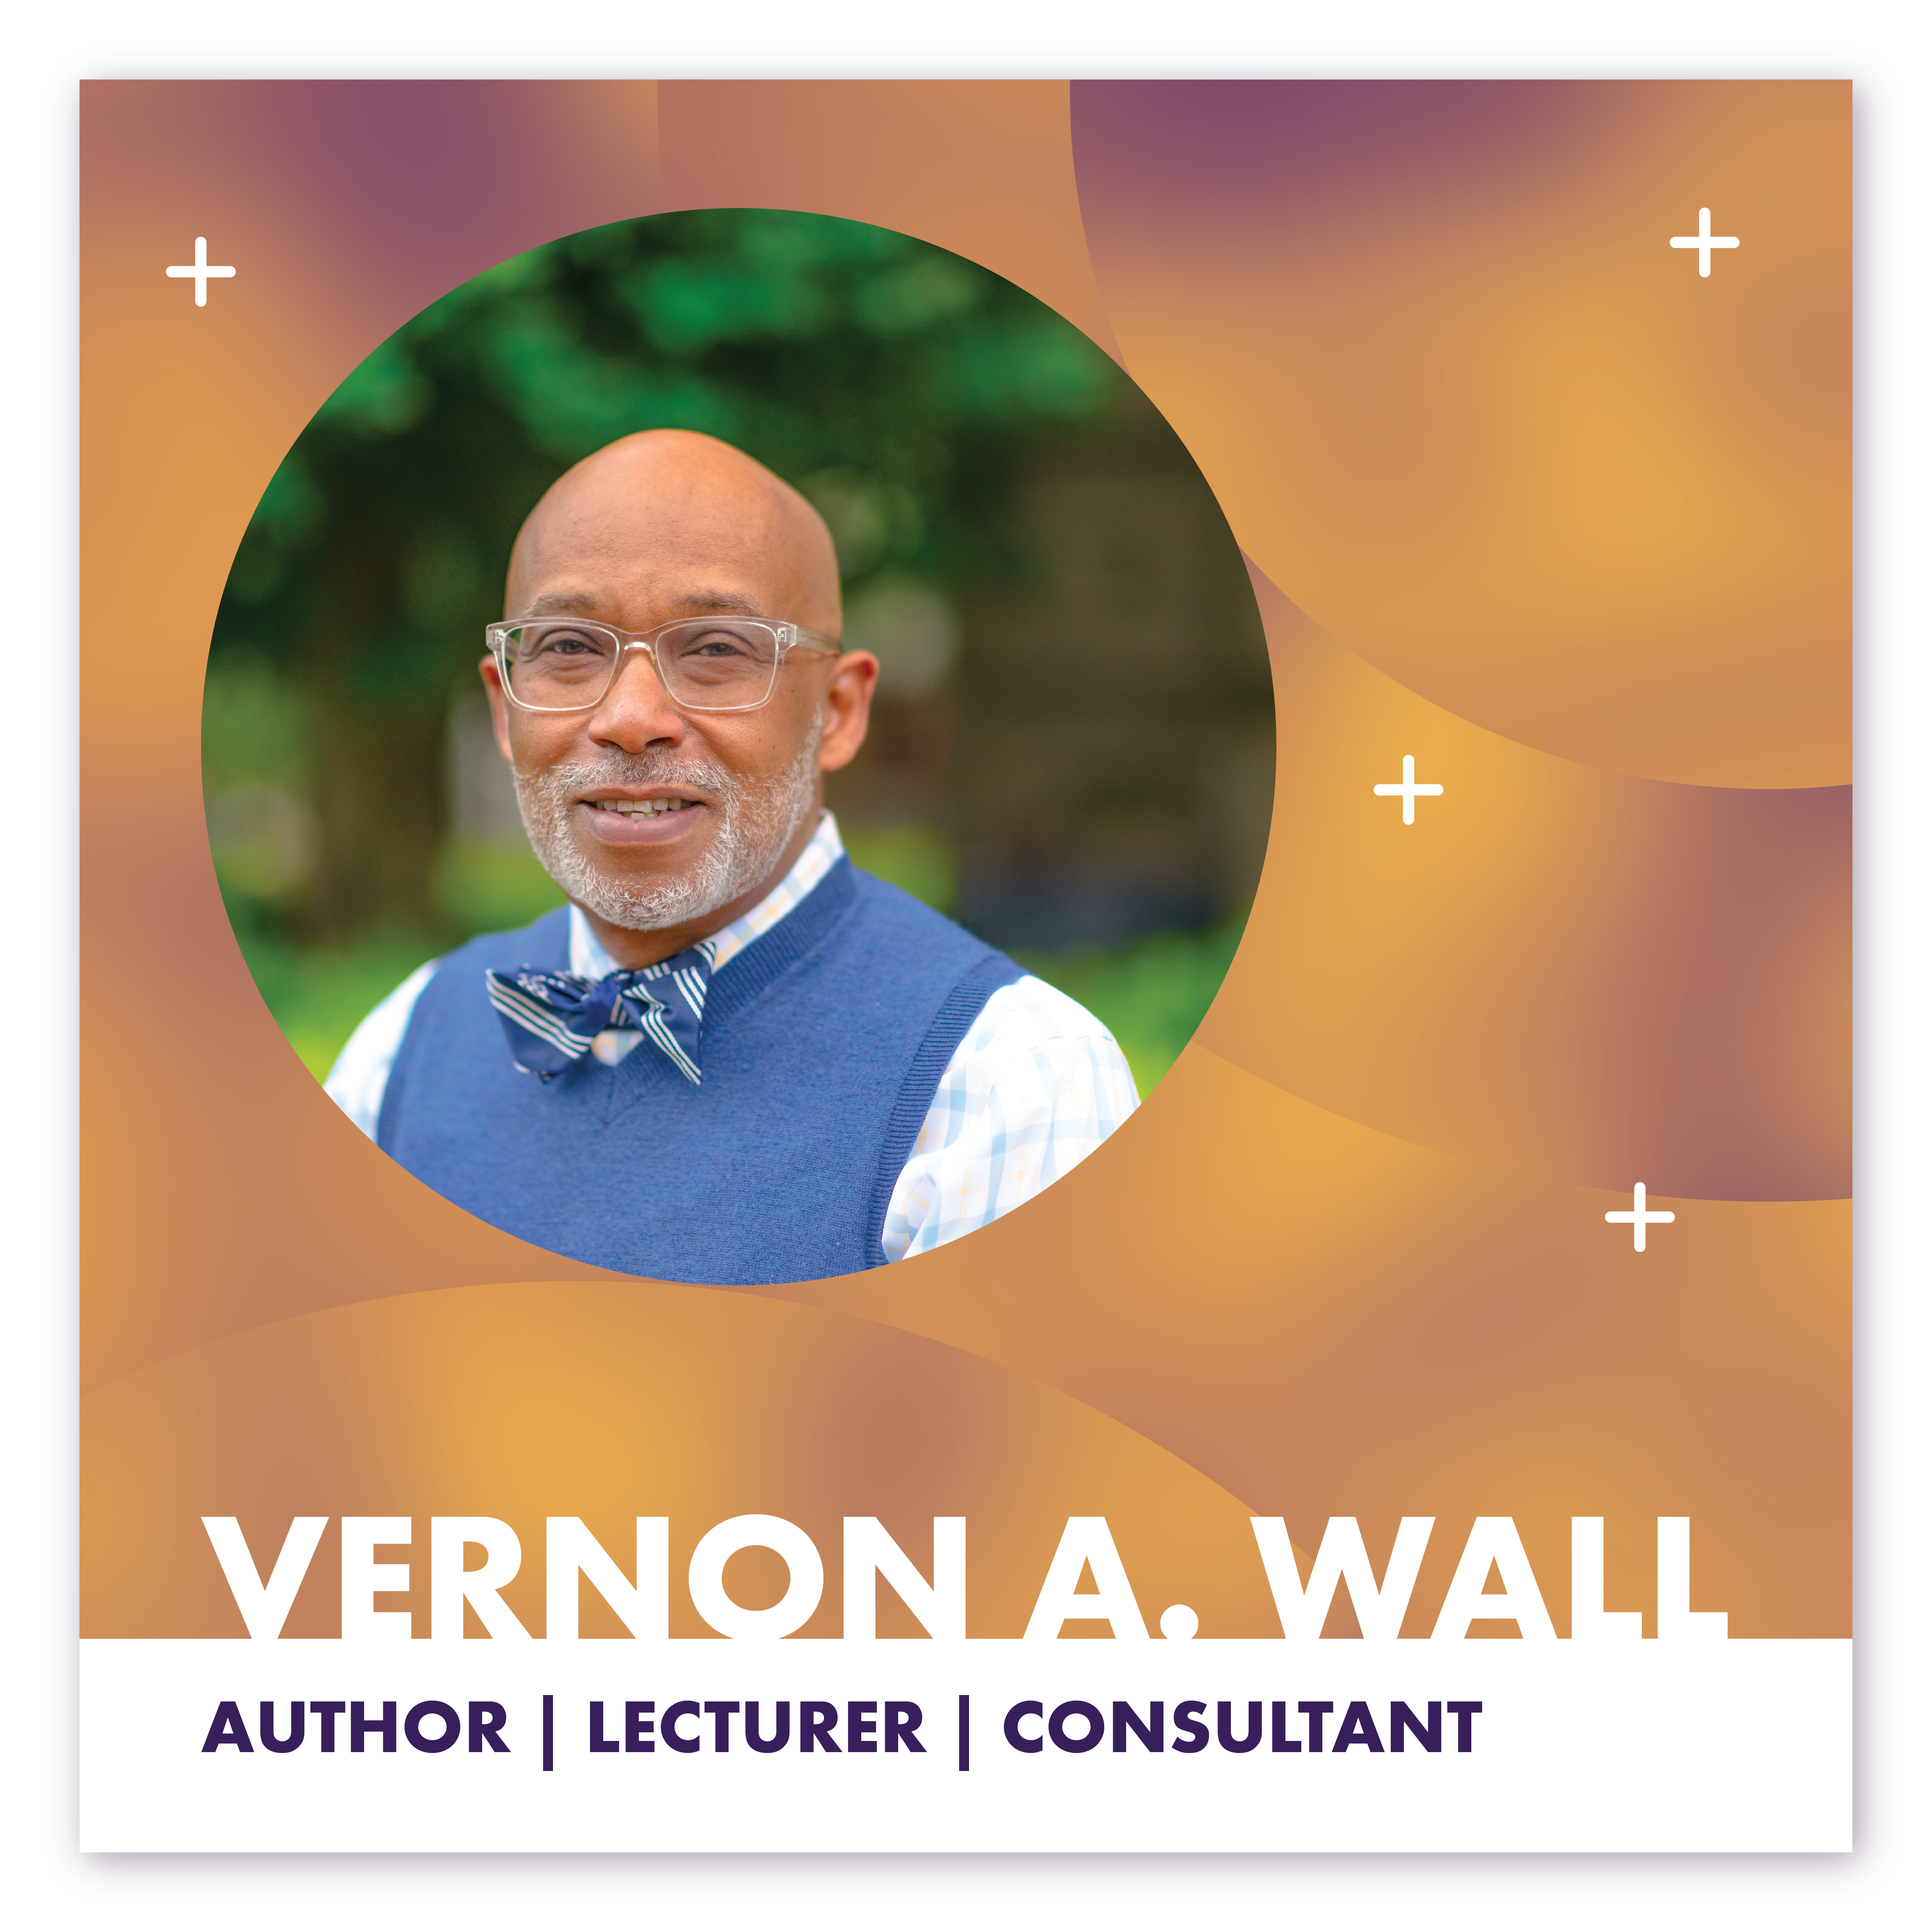 Vernon Wall: Author, Lecturer, and Consultant